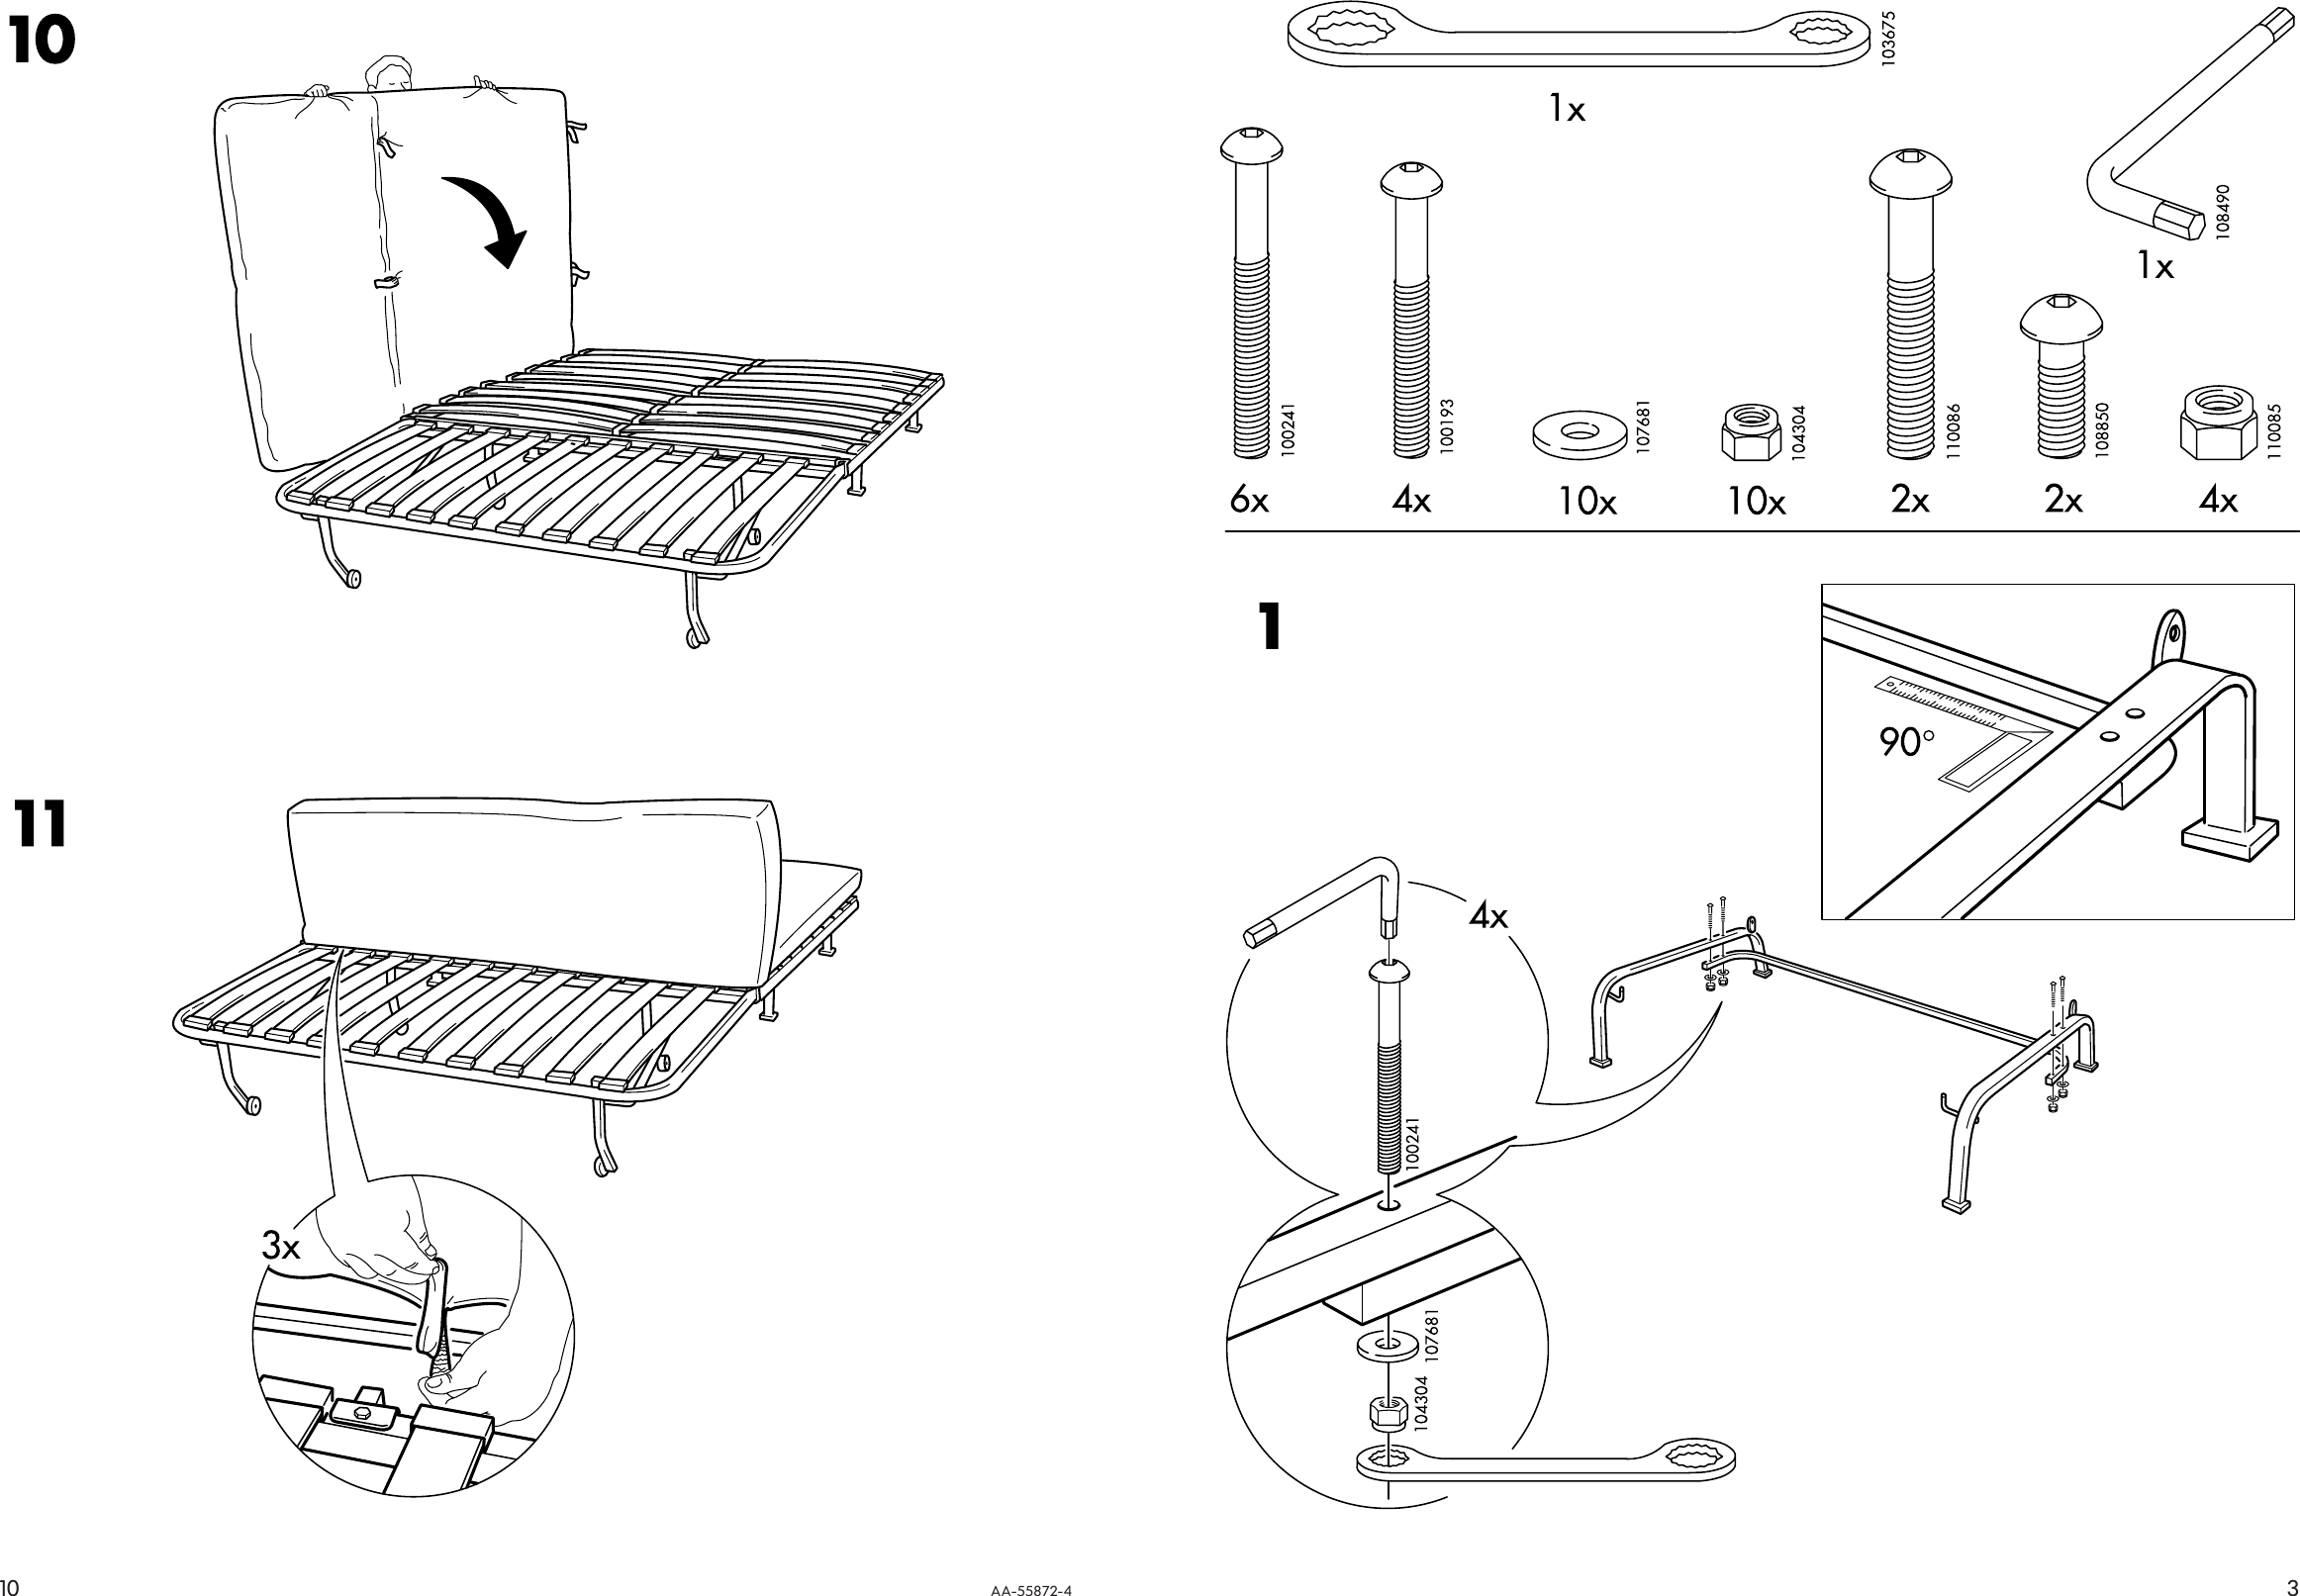 Page 3 of 6 - Ikea Ikea-Lycksele-Frame-Sofabed-Assembly-Instruction